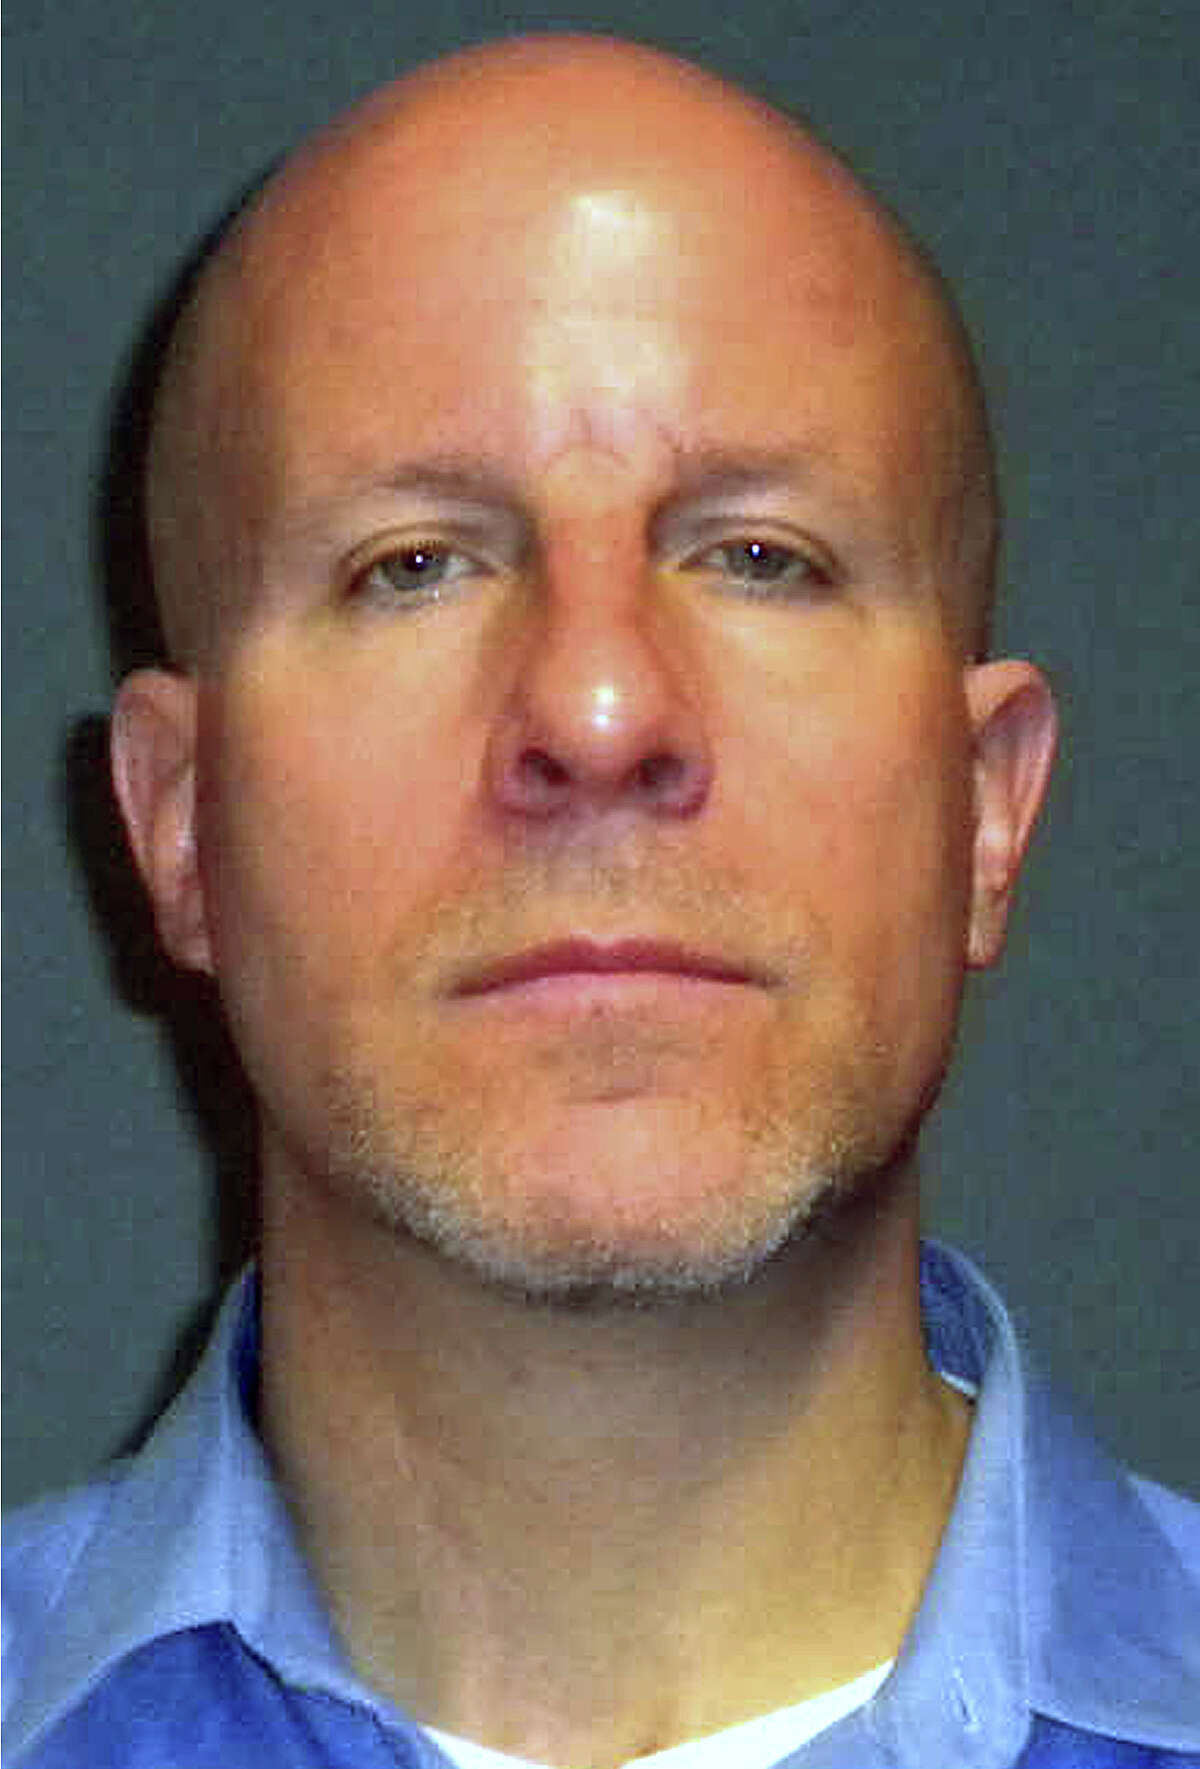 This booking photo provided by the Fairfield Police Department shows former Fairfield Ludlowe High School teacher Glenn Mishuck, of Bridgeport, Conn. Mishuck, 47, was arrested and charged Thursday, Oct. 31, 2013 with sexual assault after an investigation determined he had a sexual relationship with an under-aged female student.